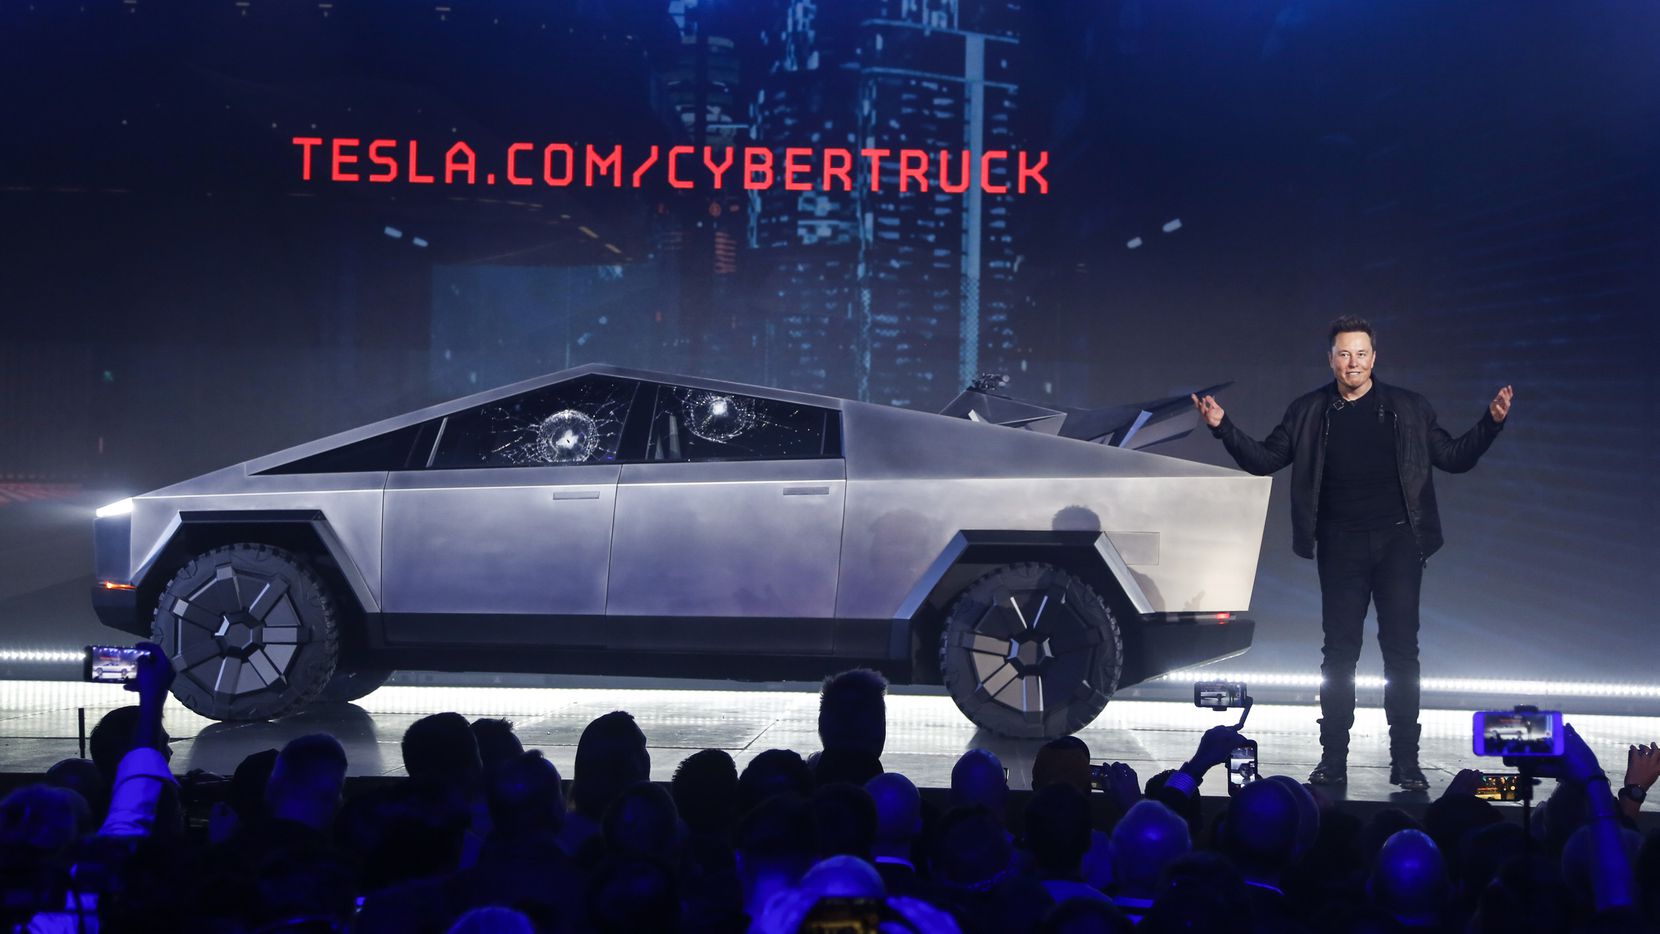 Tesla CEO Elon Musk introduces the Cybertruck at Tesla's design studio on Nov. 21, 2019, in Hawthorne, Calif. Musk is taking on the workhorse heavy pickup truck market with his latest electric vehicle. (AP Photo/Ringo H.W. Chiu)